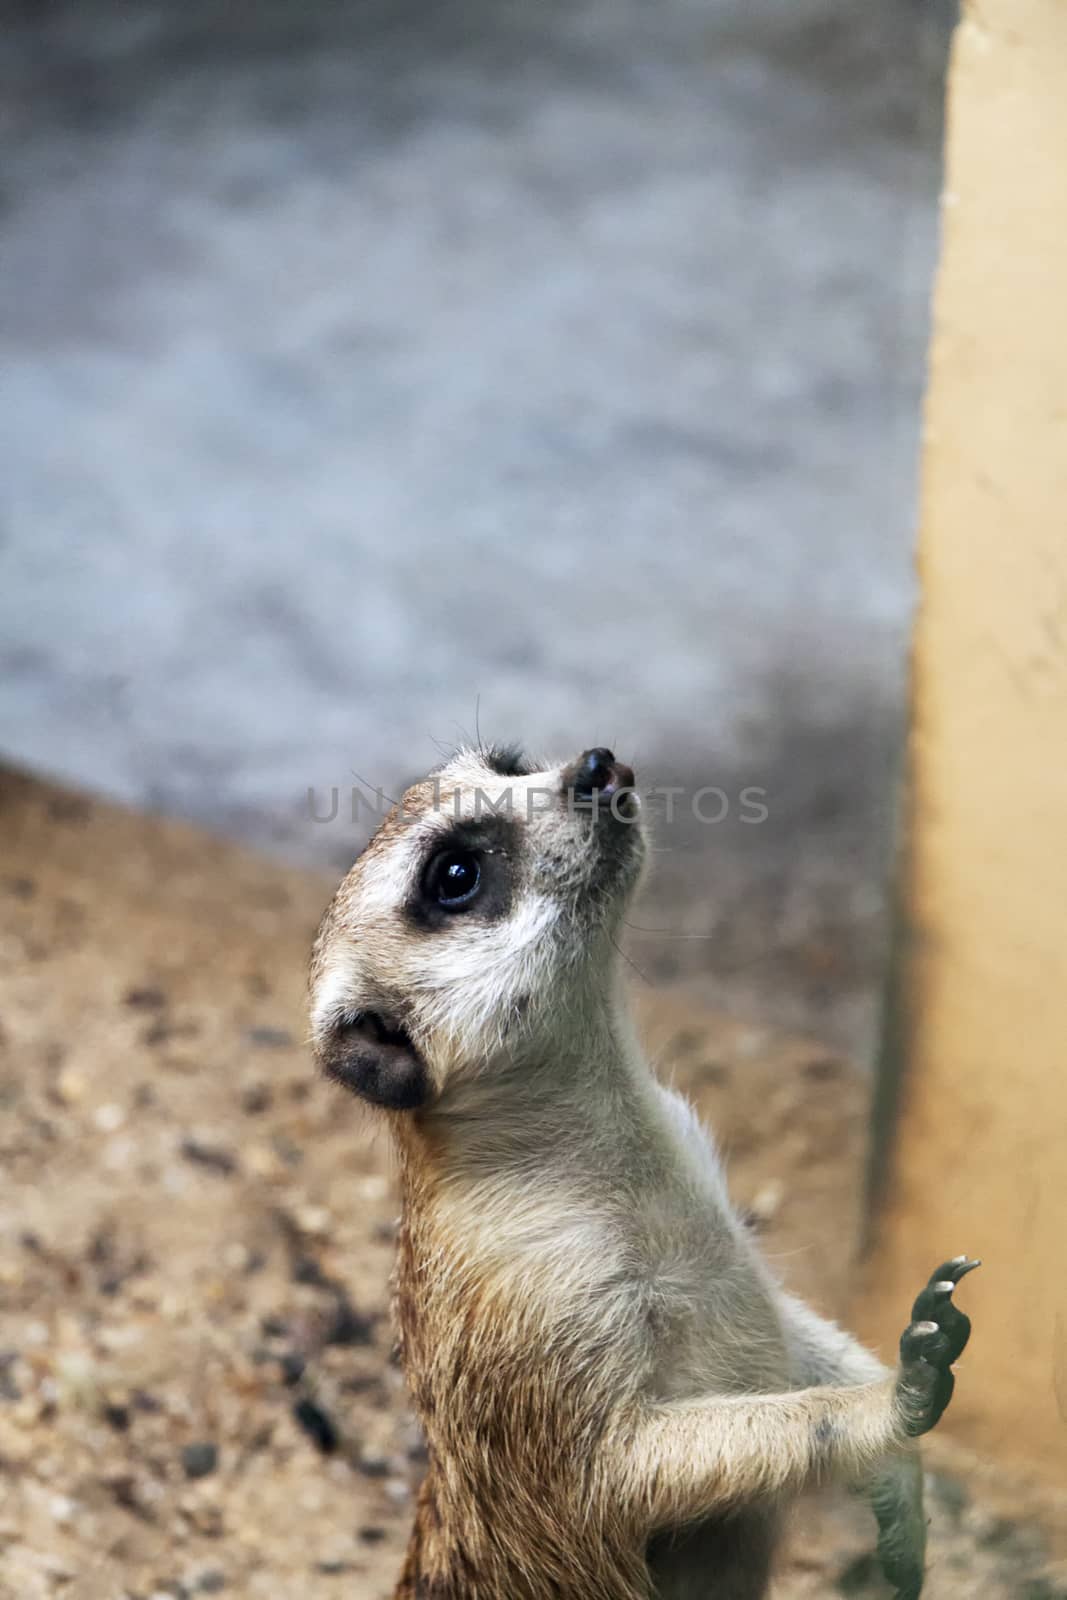 A single Meerkat looking on at the crowd